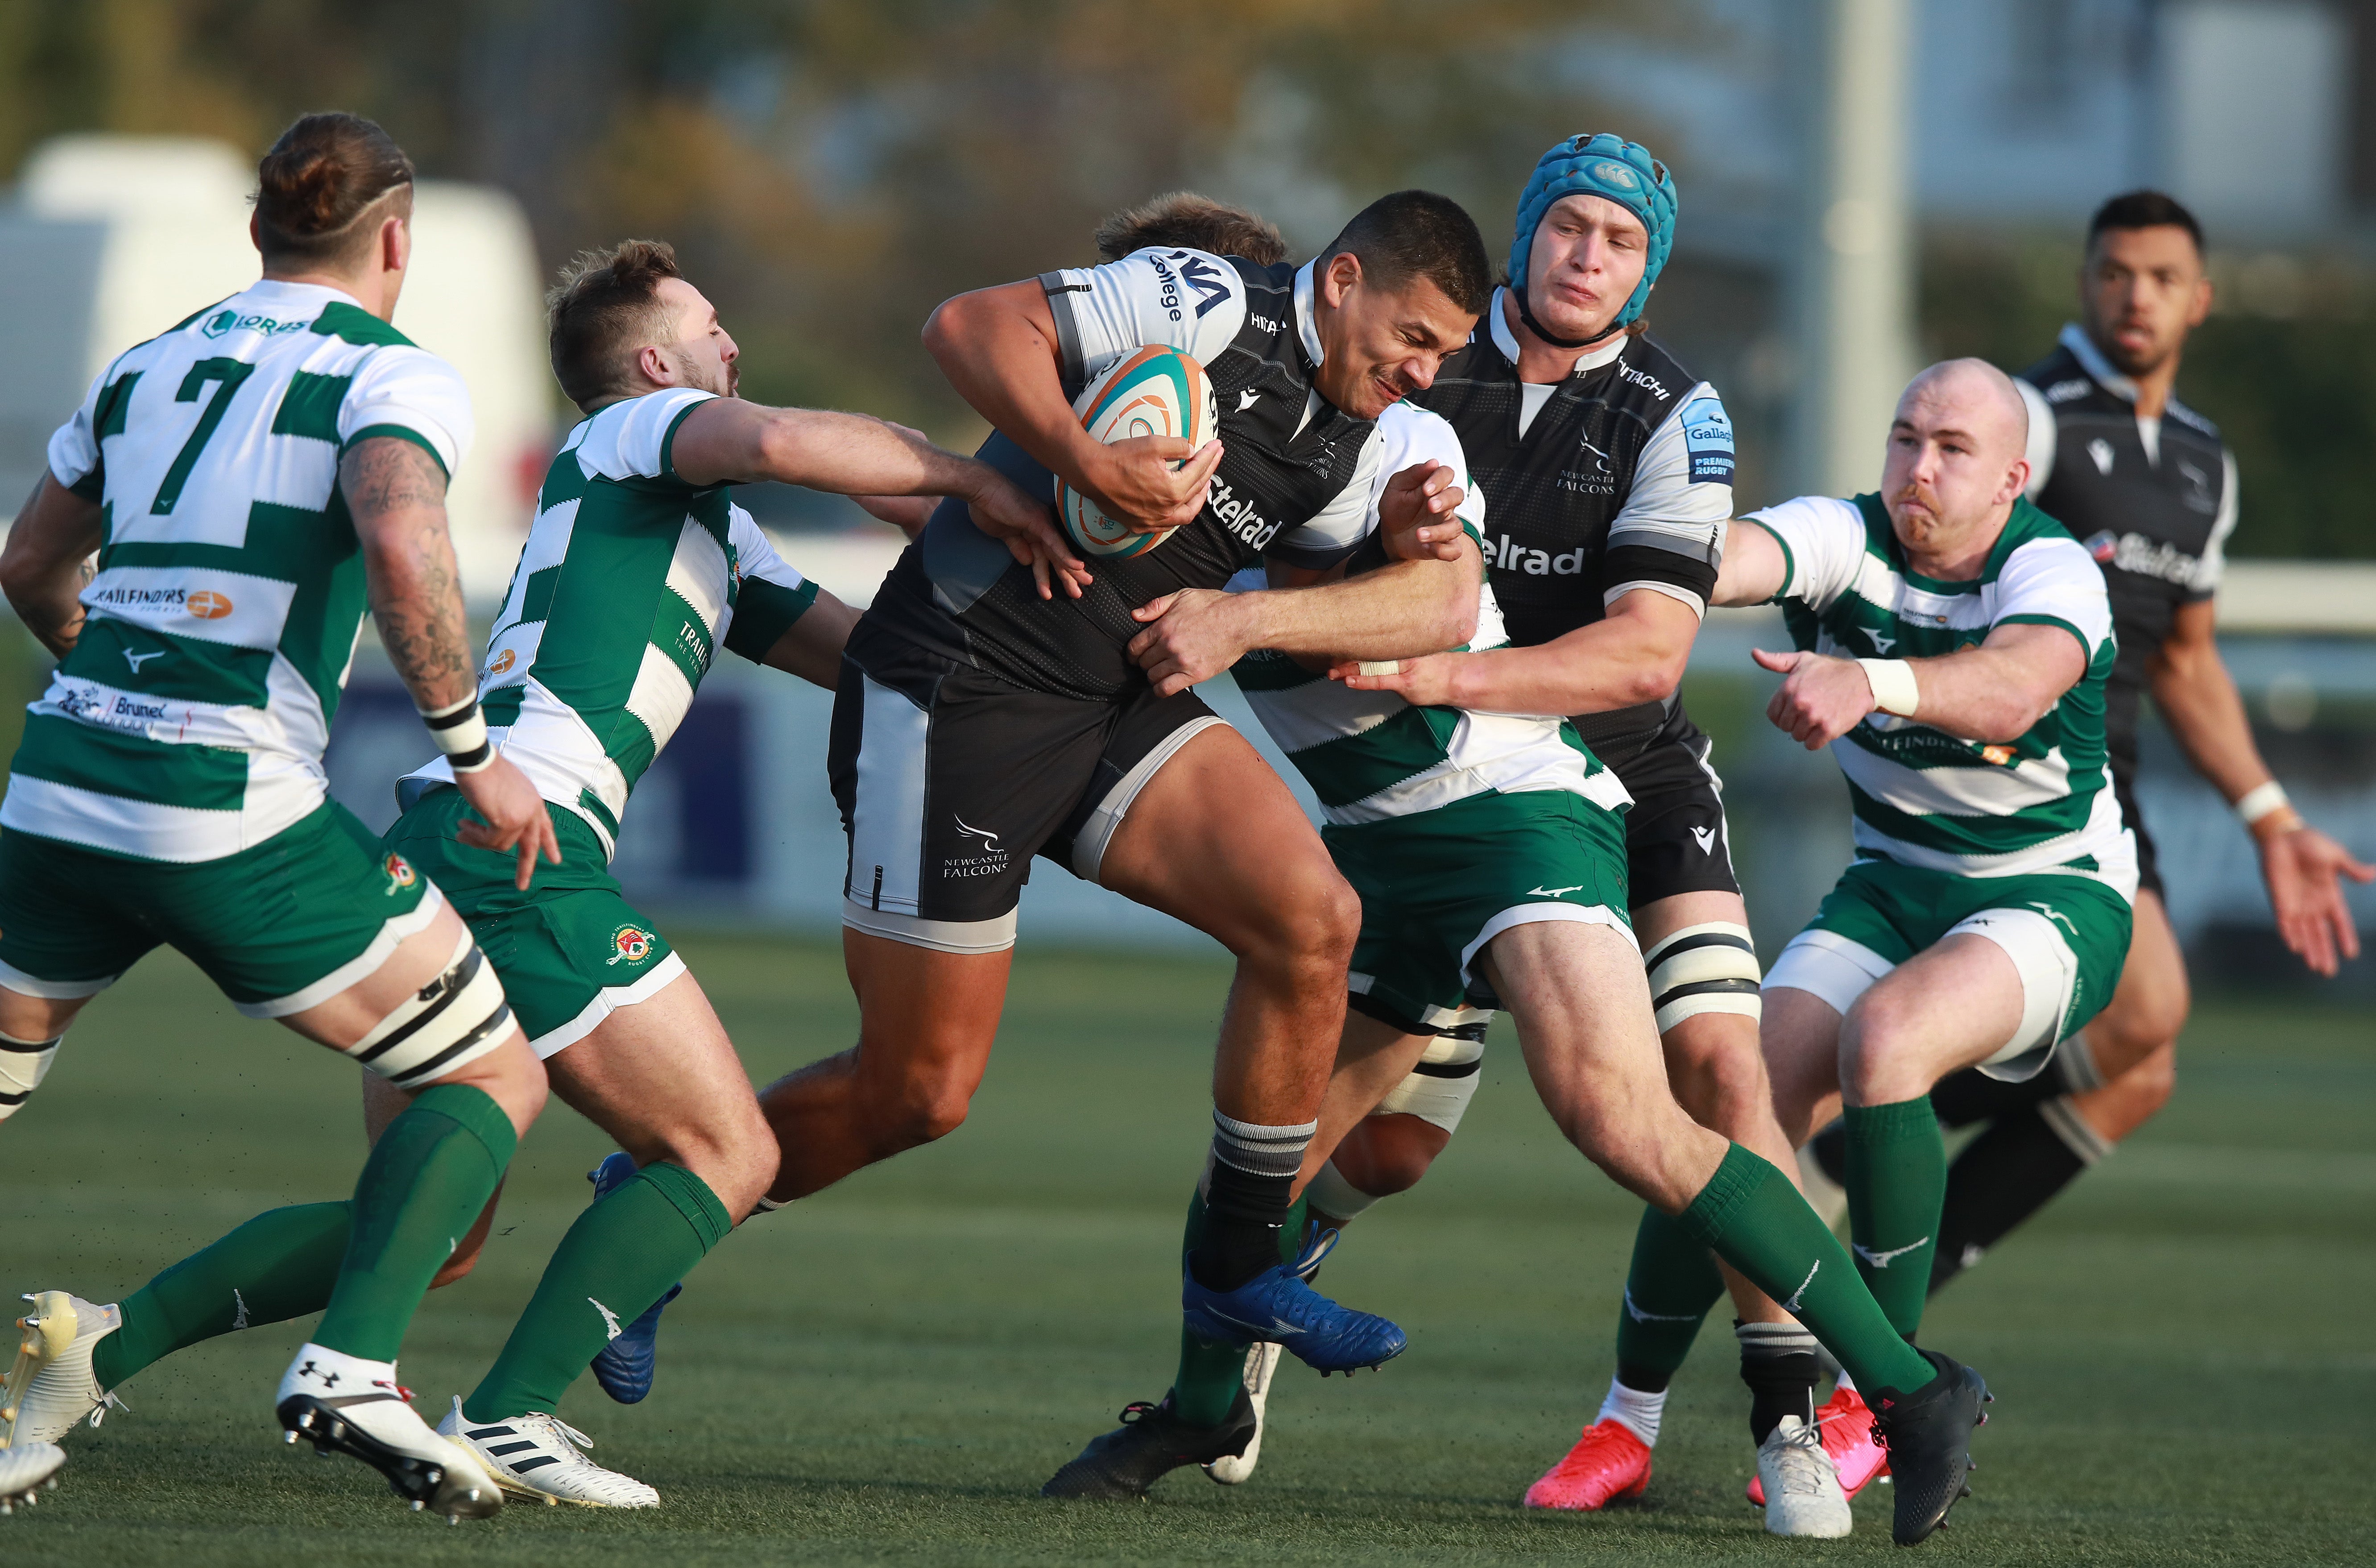 Newcastle Falcons return to Premiership action after two pre-season games against Ealing Trailfinders